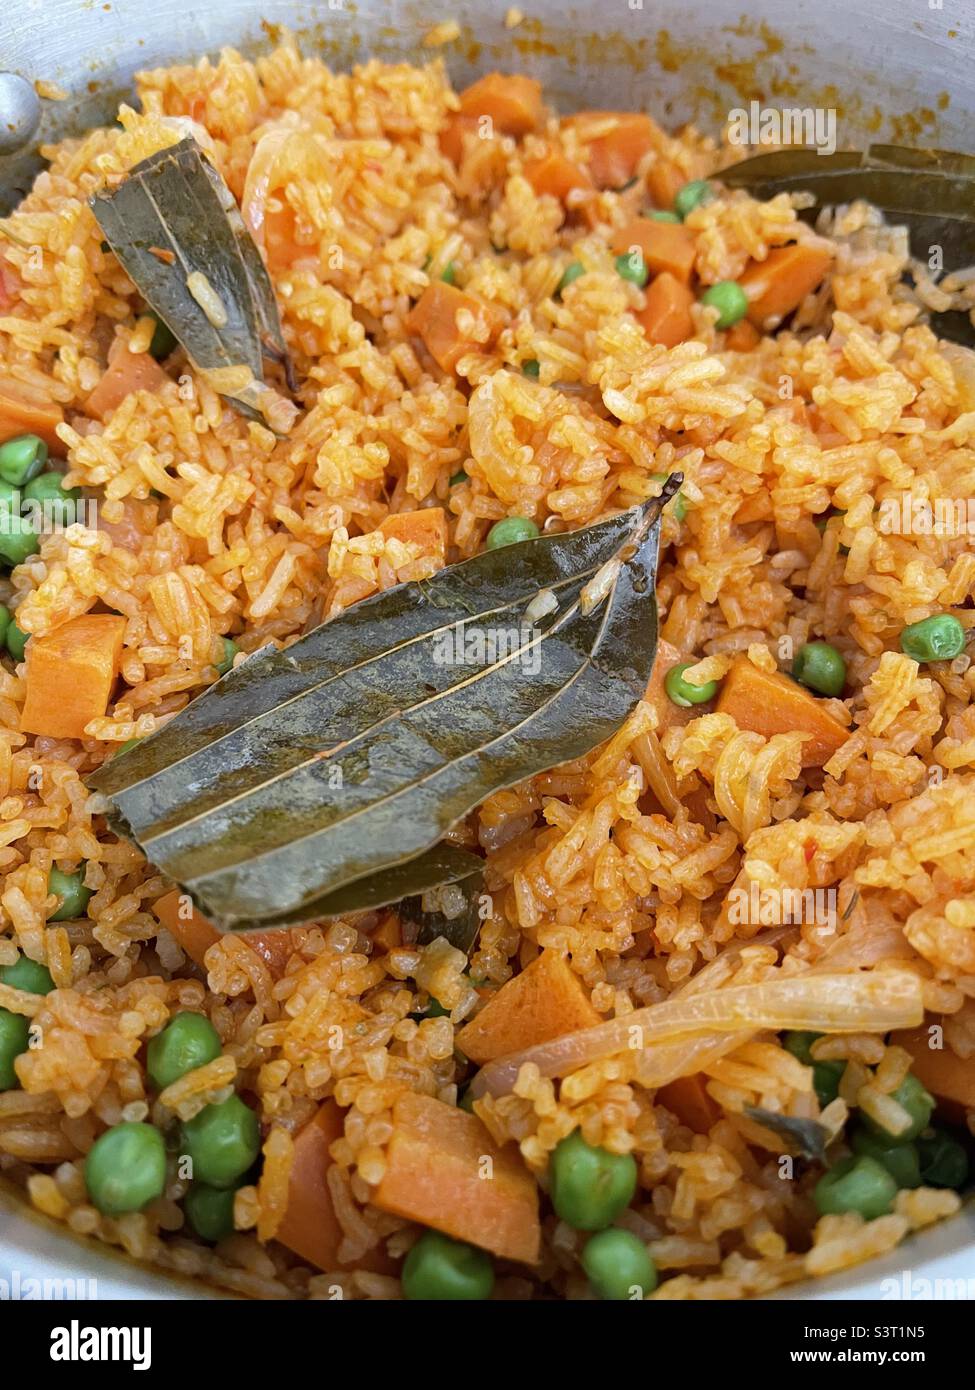 Jollof rice, Ghanaian rice dish made by cooking rice in a rich tomato sauce with herbs and spices Stock Photo